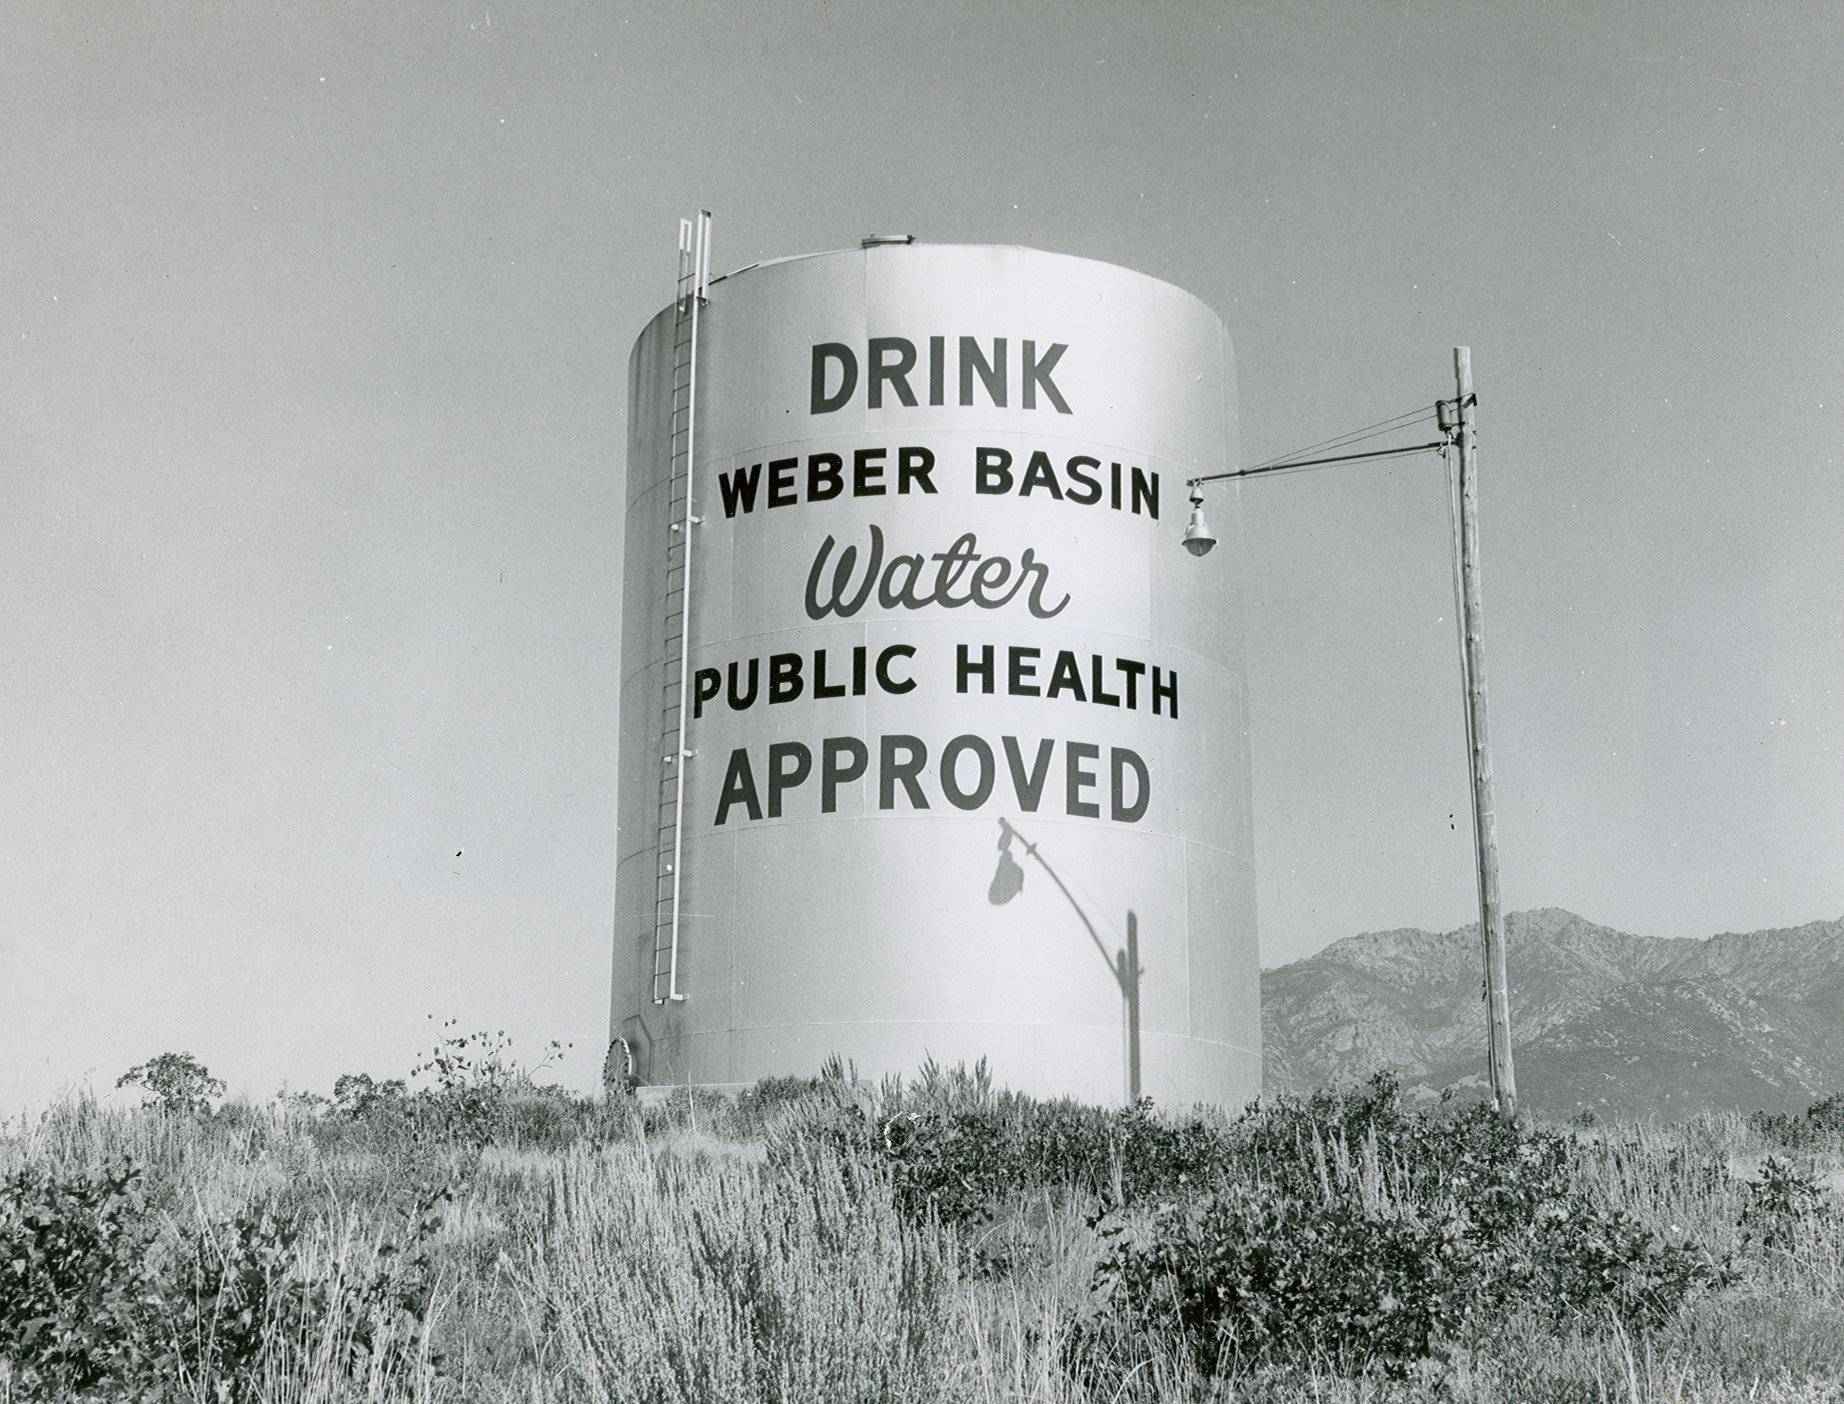 Large water tank with words saying Drink Weber Basin Water